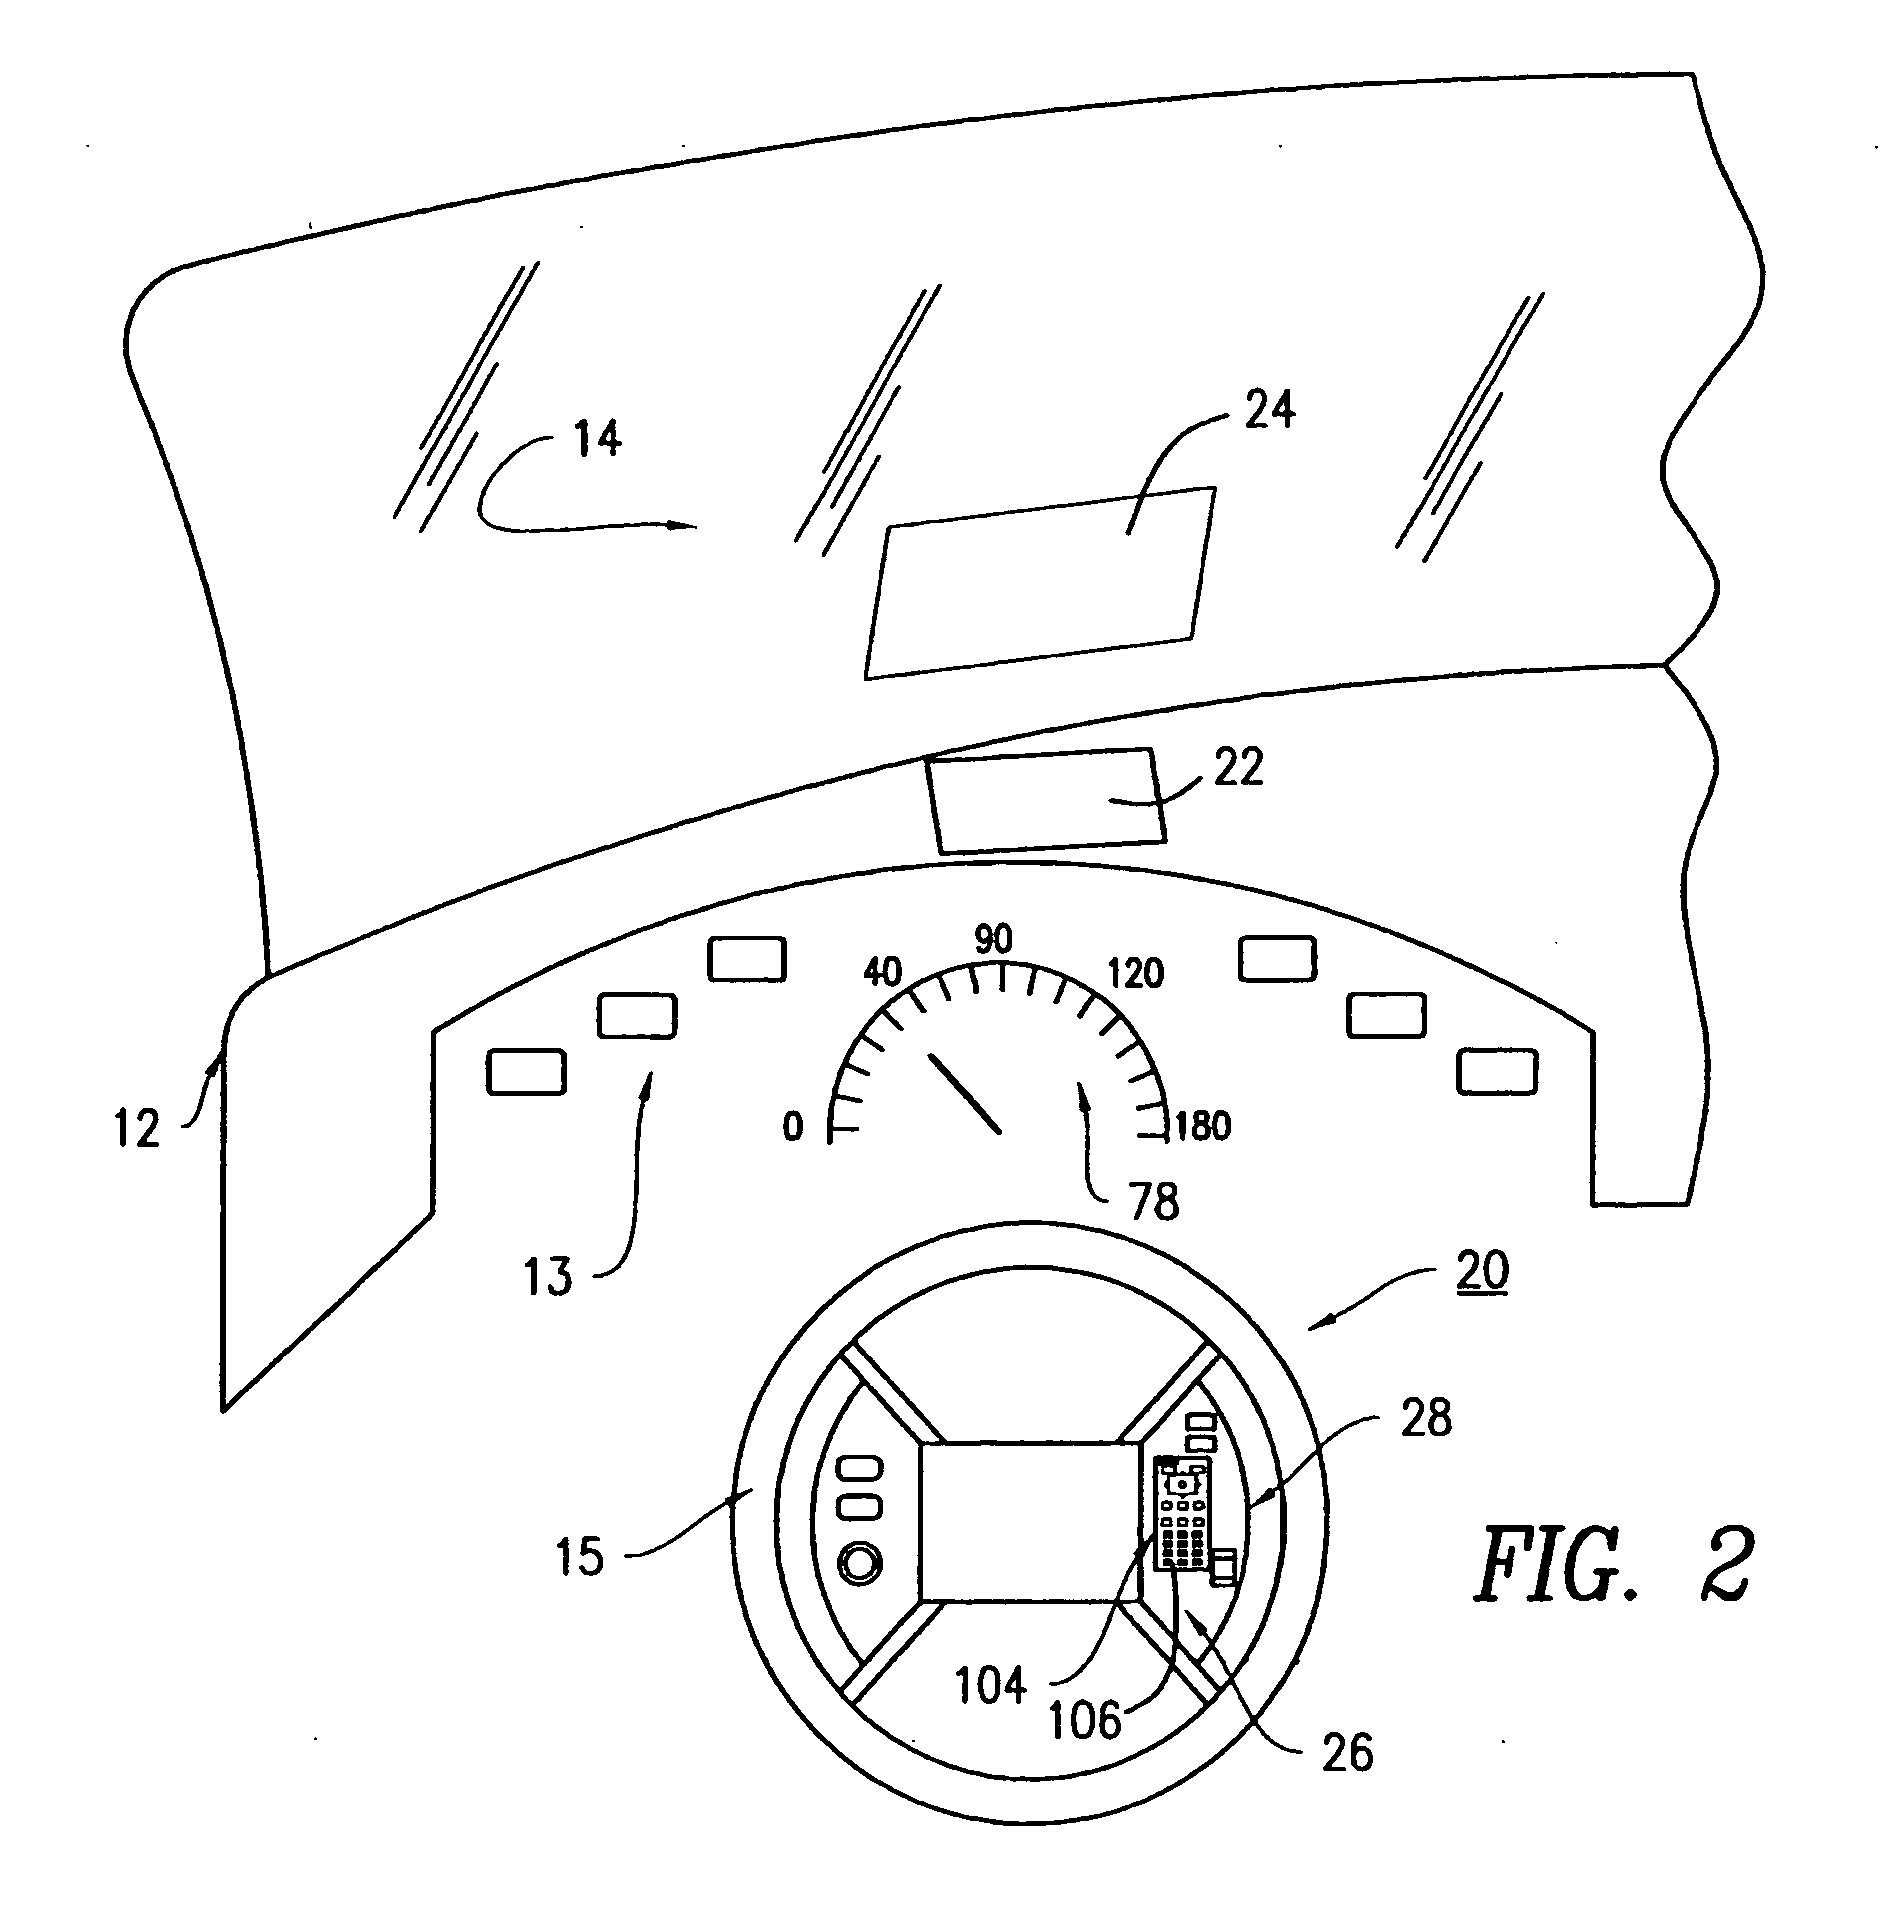 Portable adaptor and software for use with a heads-up display unit